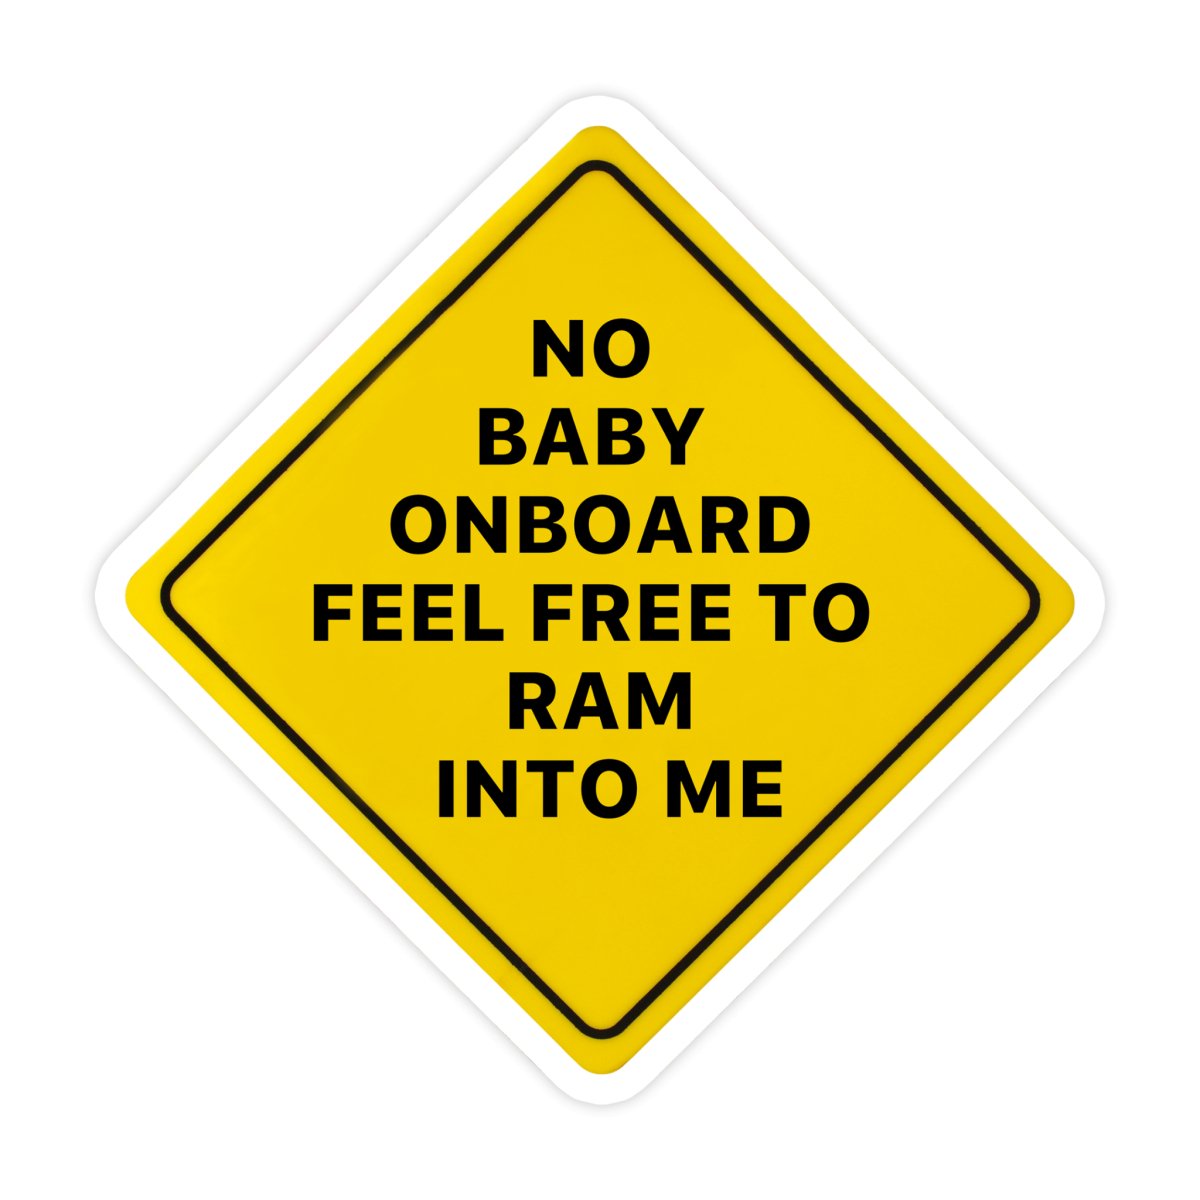 No Baby On Board Feel Free To Ram Into Me Bumper Sticker - stickerbullNo Baby On Board Feel Free To Ram Into Me Bumper StickerRetail StickerstickerbullstickerbullTaylor_NoBabyRam [#100]No Baby On Board Feel Free To Ram Into Me Bumper Sticker